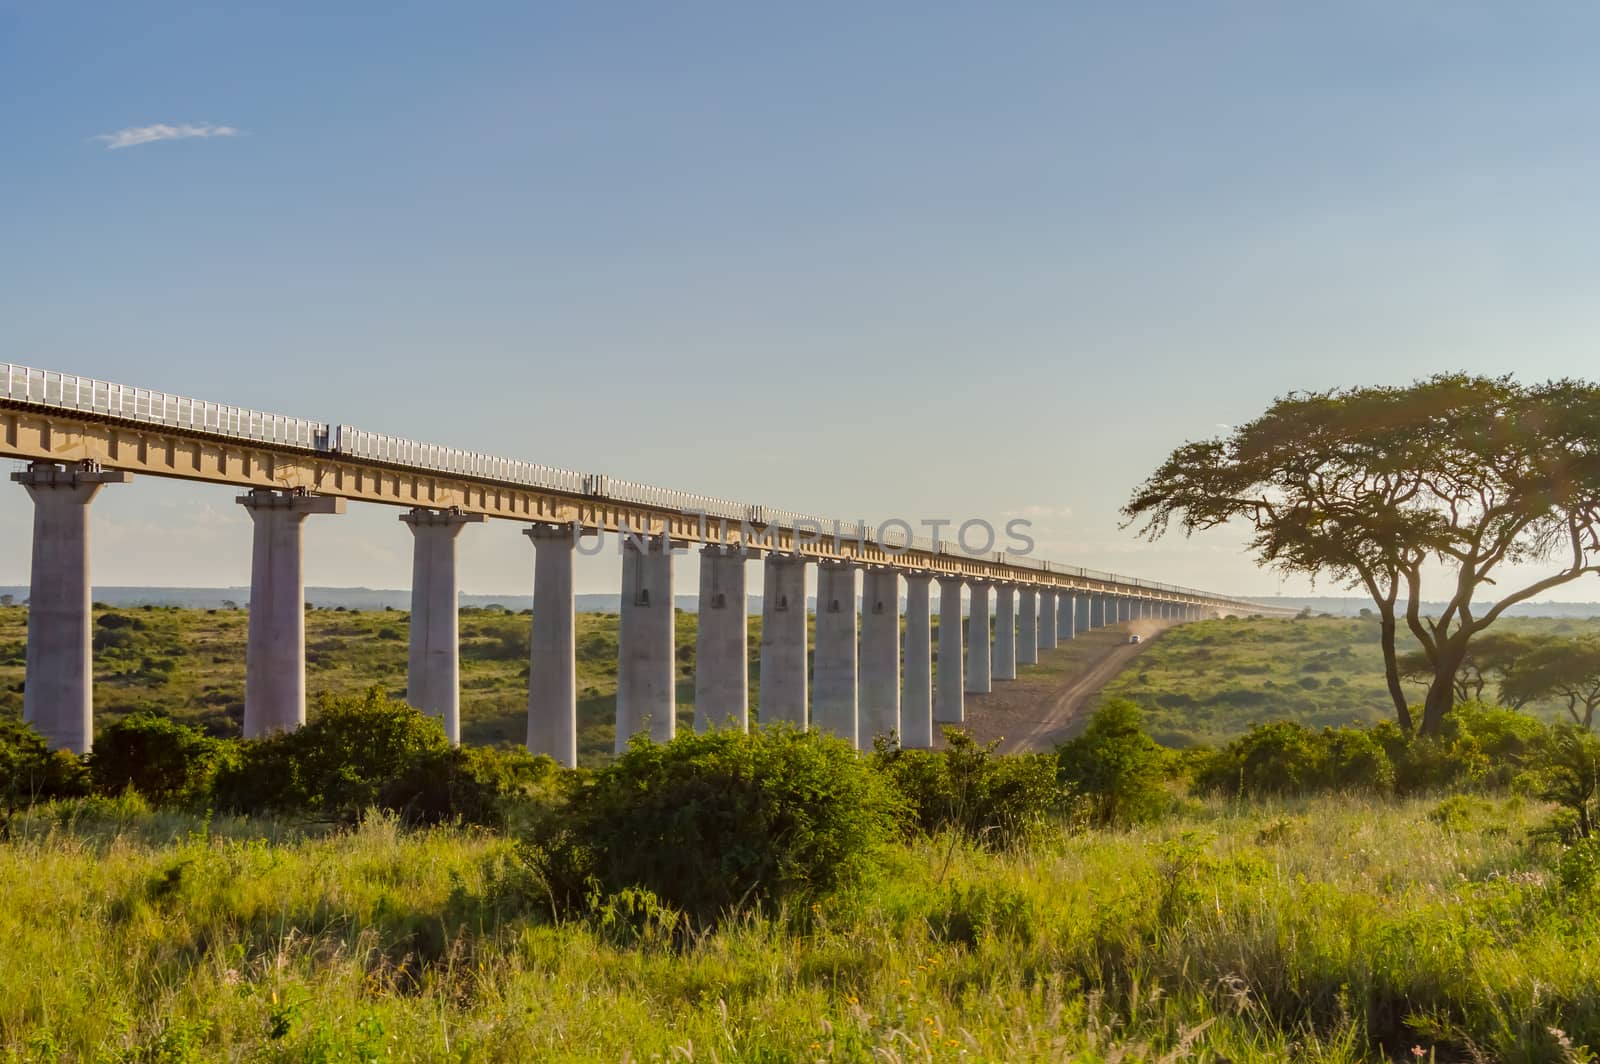 View of the viaduct of the Nairobi railroad  by Philou1000